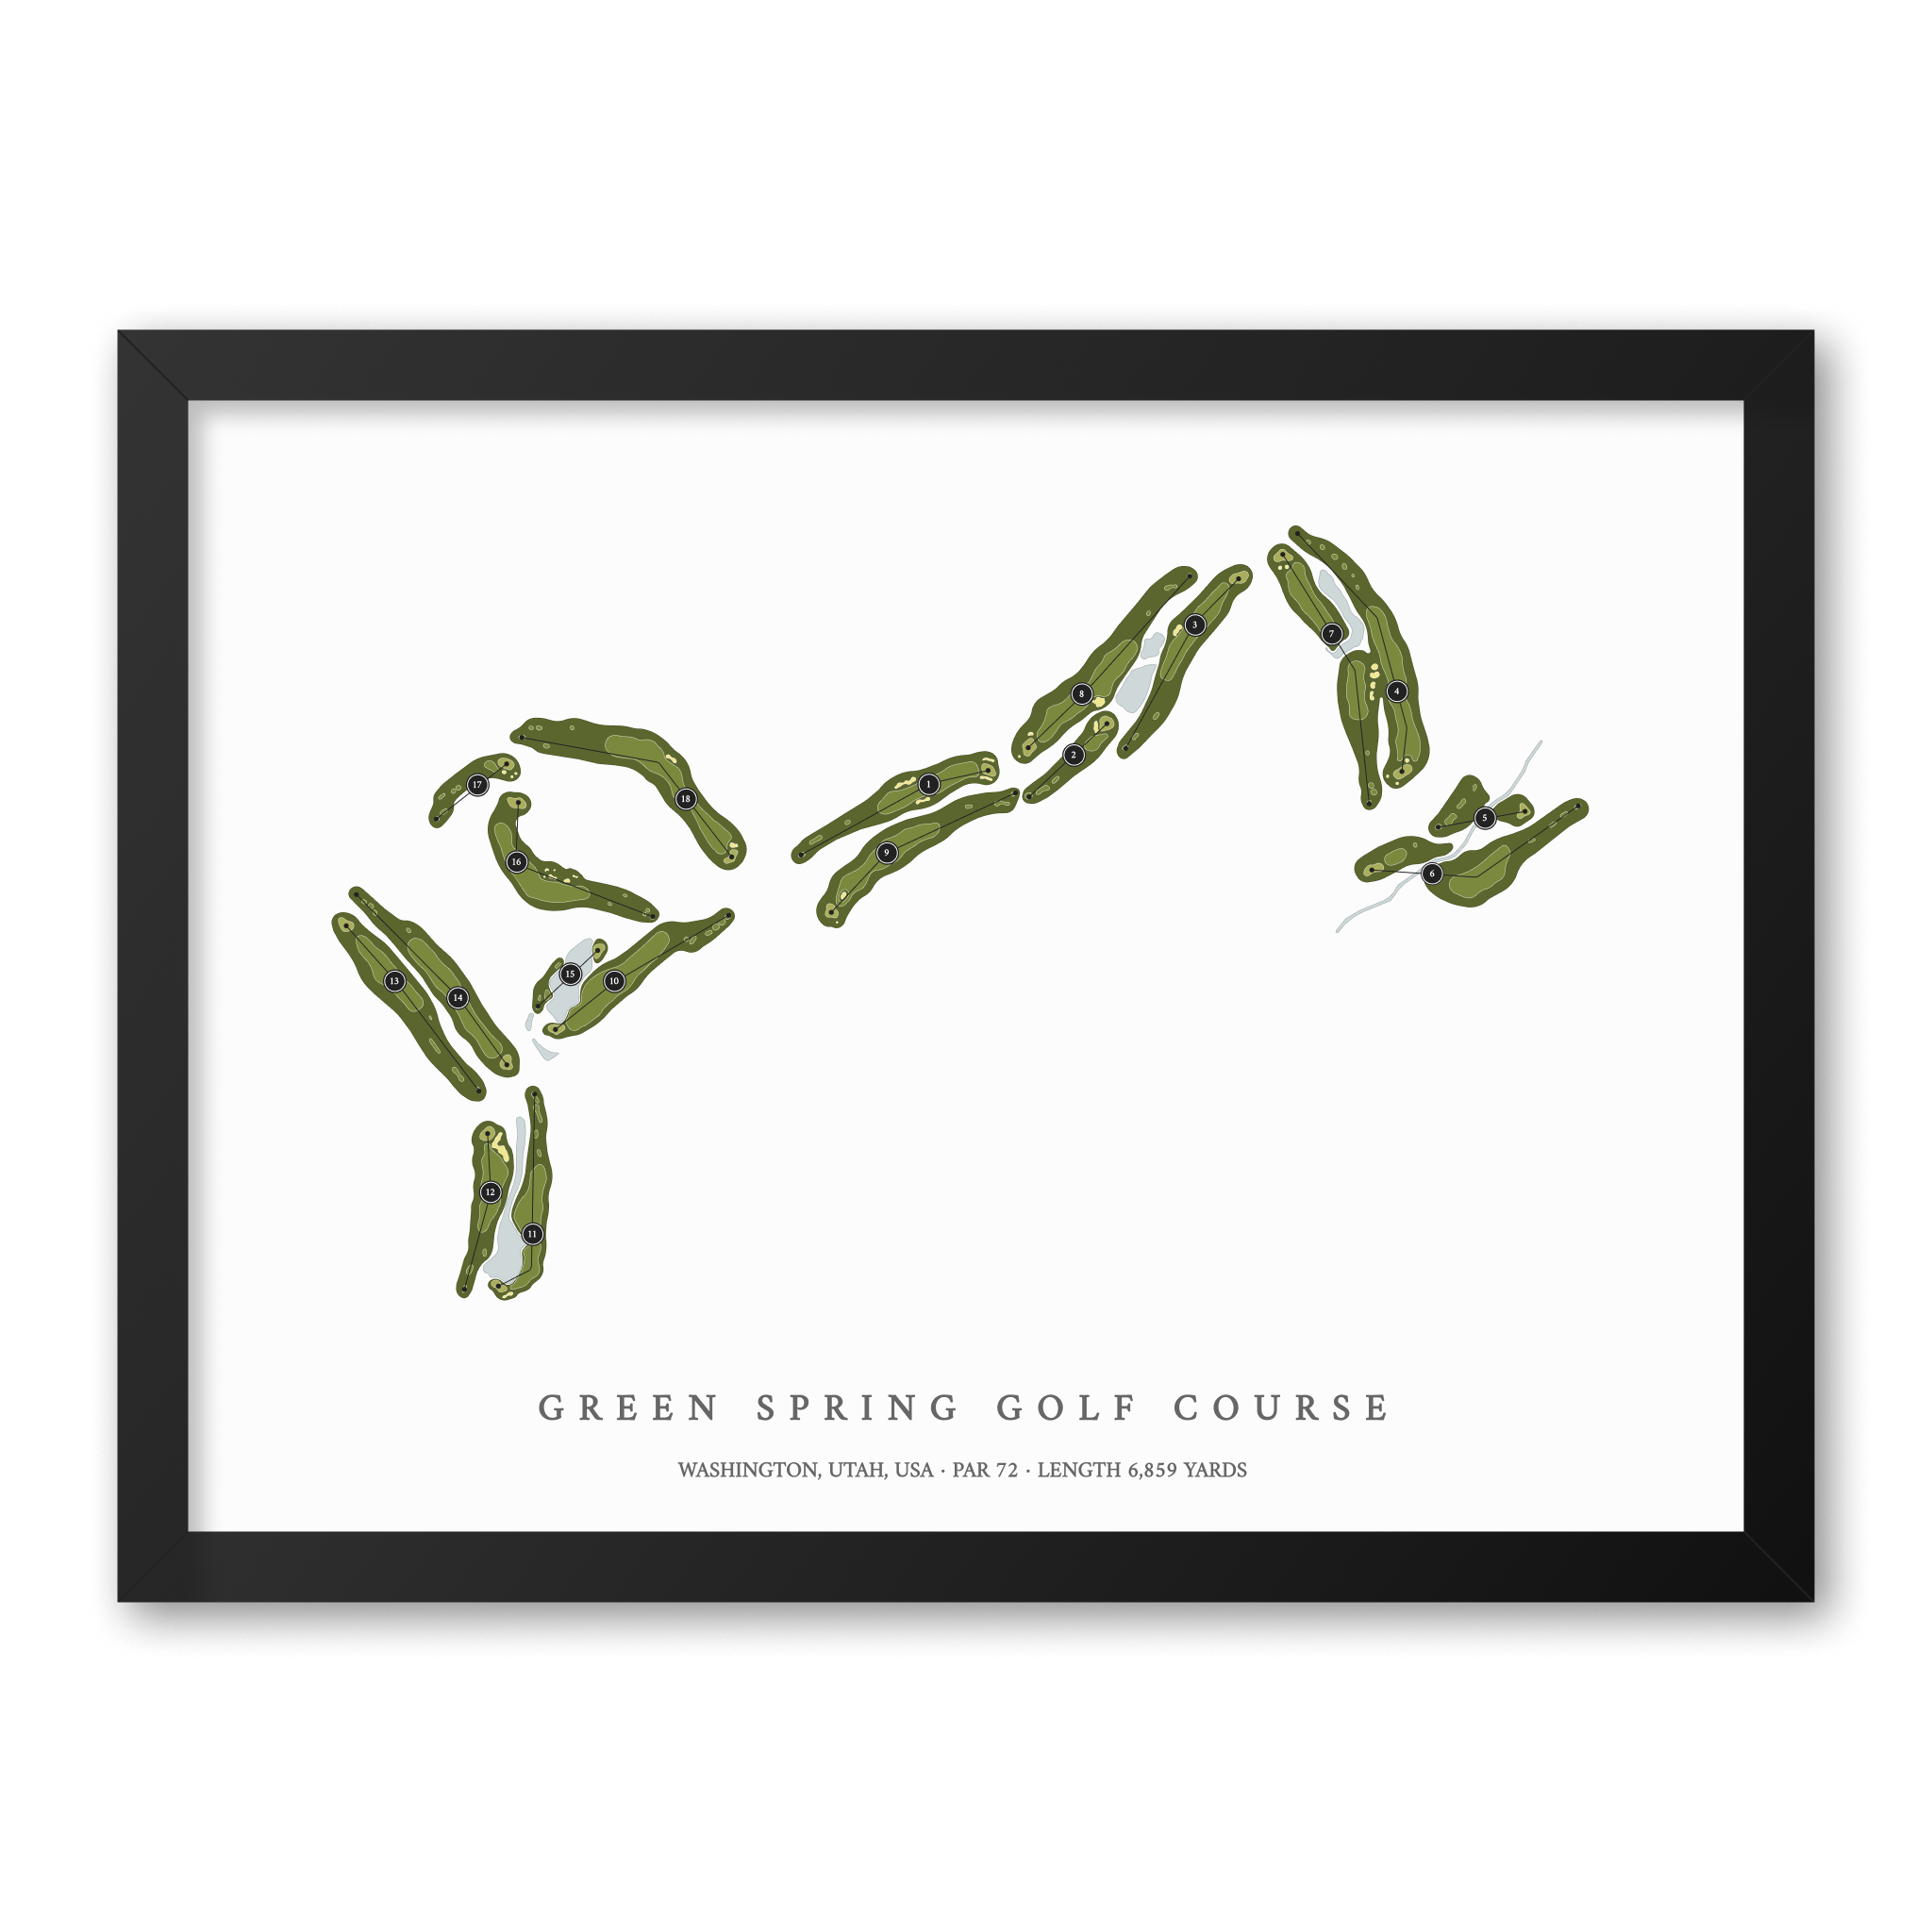 Green Spring Golf Course| Golf Course Print | Black Frame With Hole Numbers #hole numbers_yes